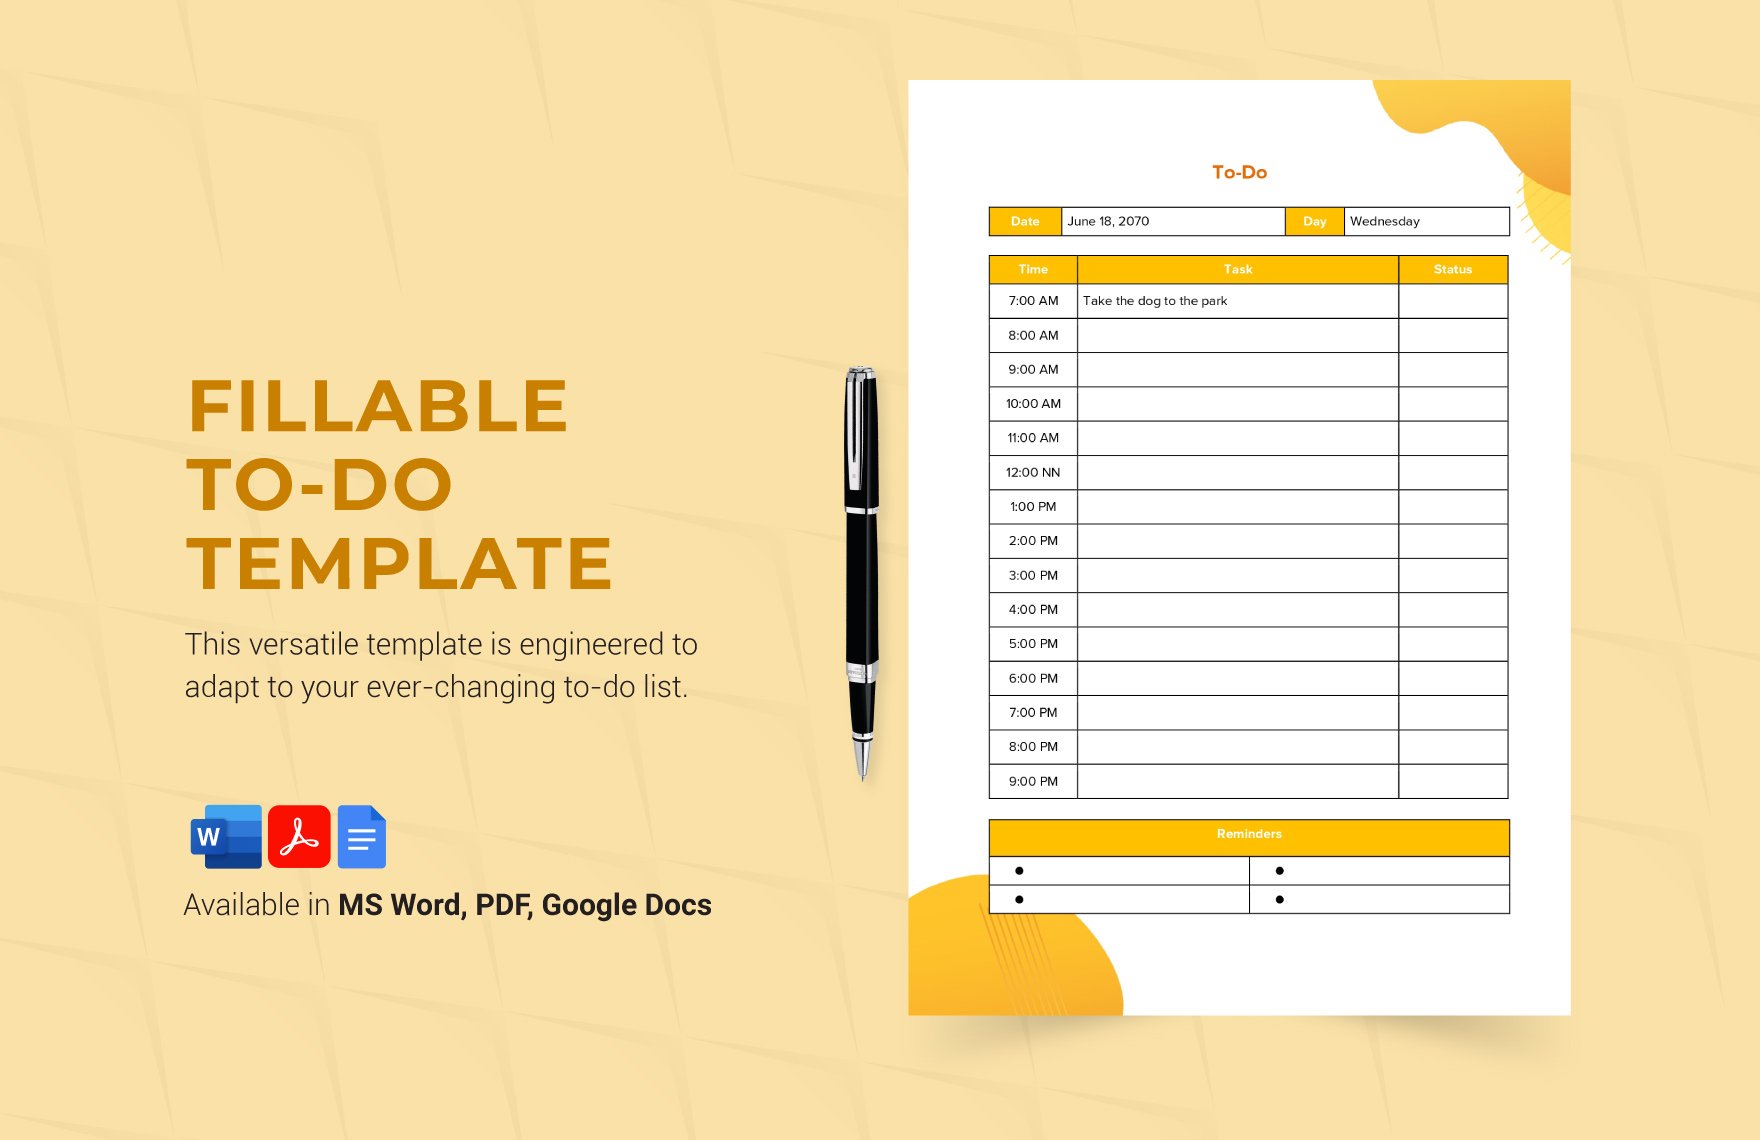 Fillable To-Do Template